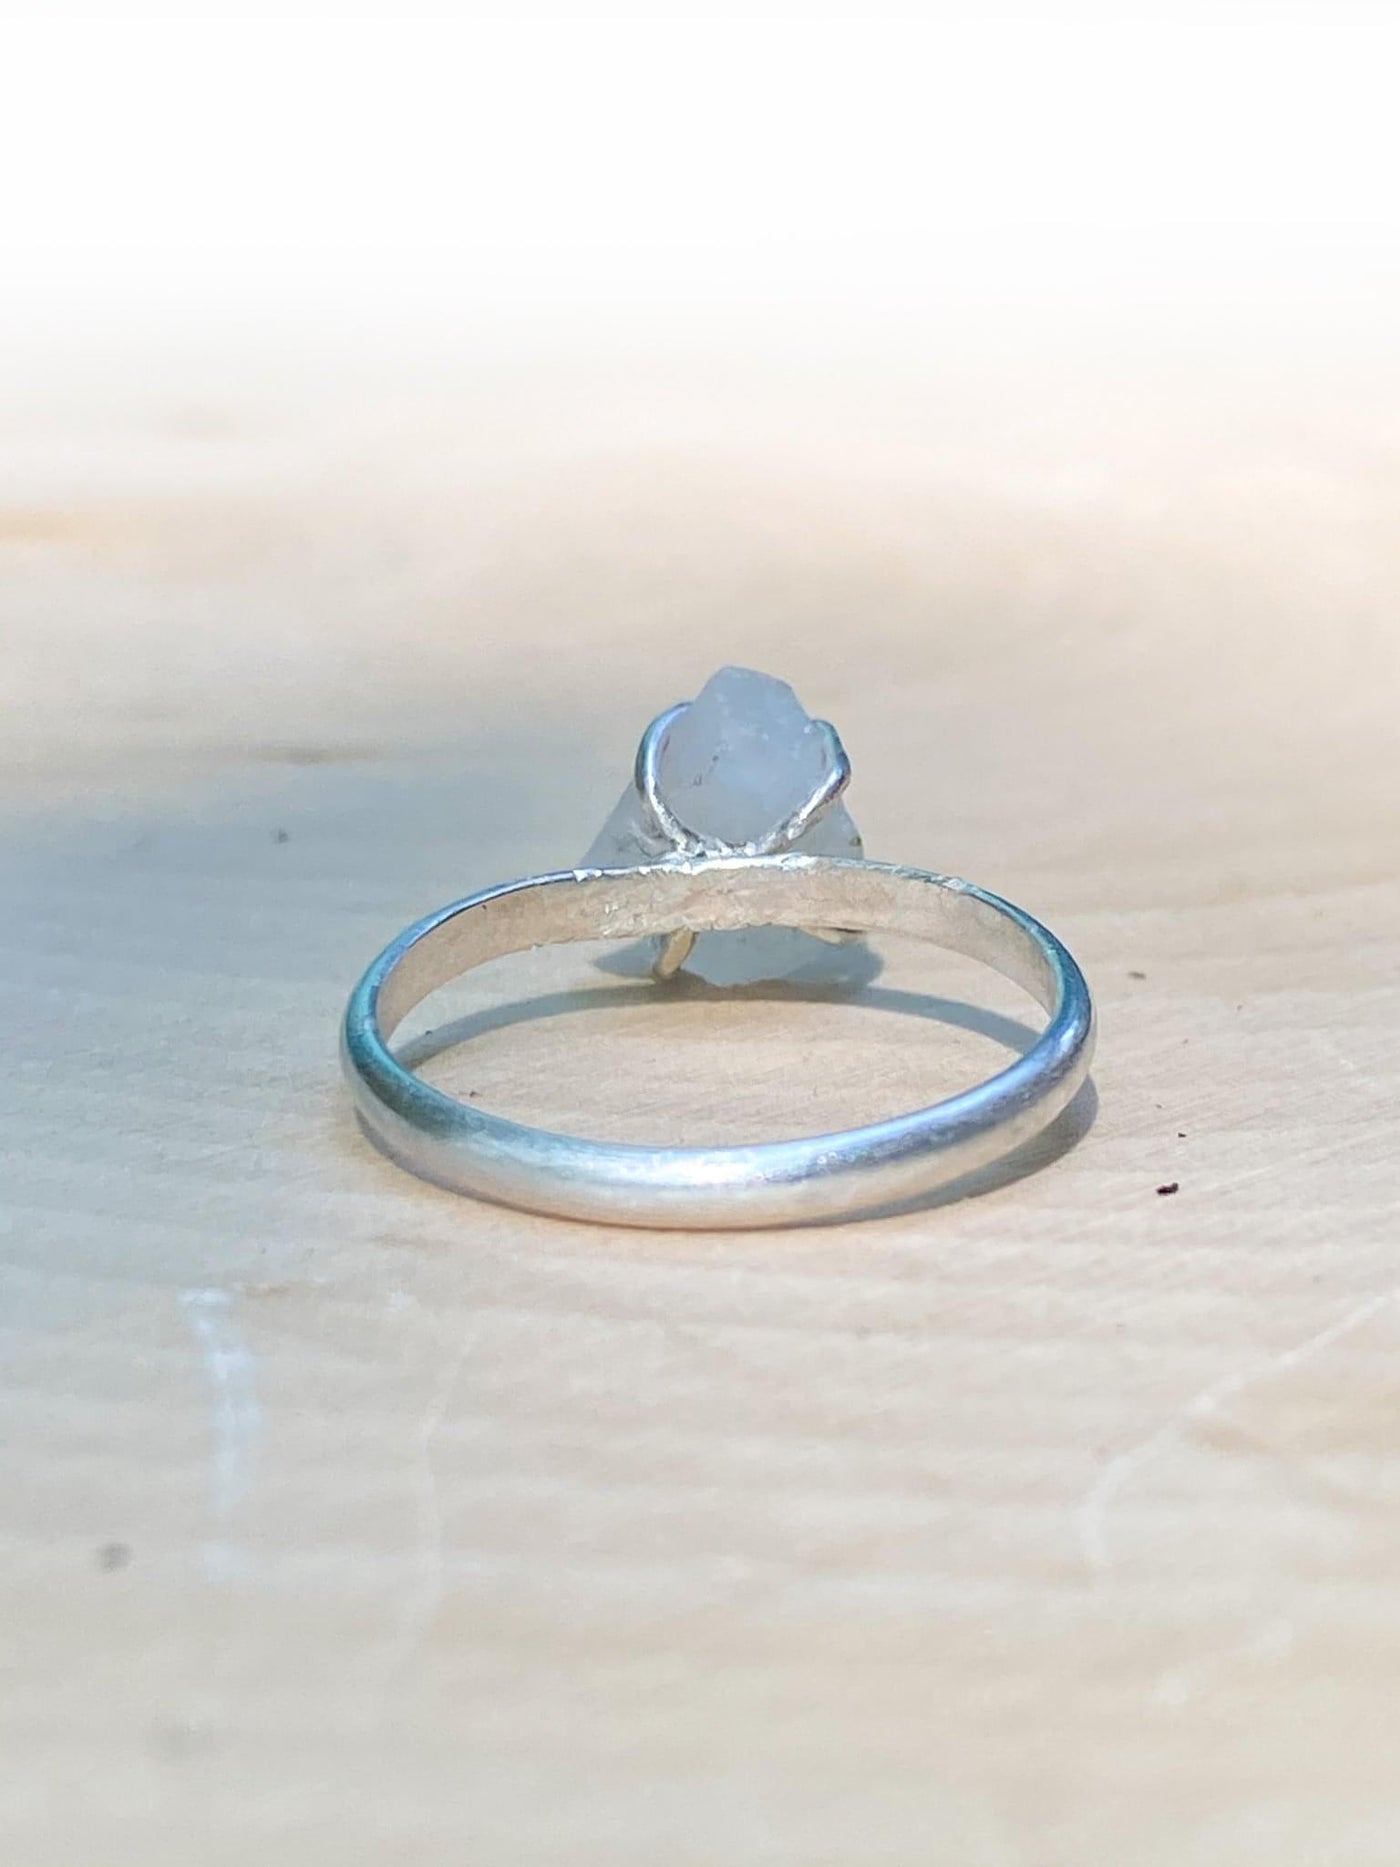 Chip of Unicorn Horn Raw Moonstone Ring - Silver Lily Studio